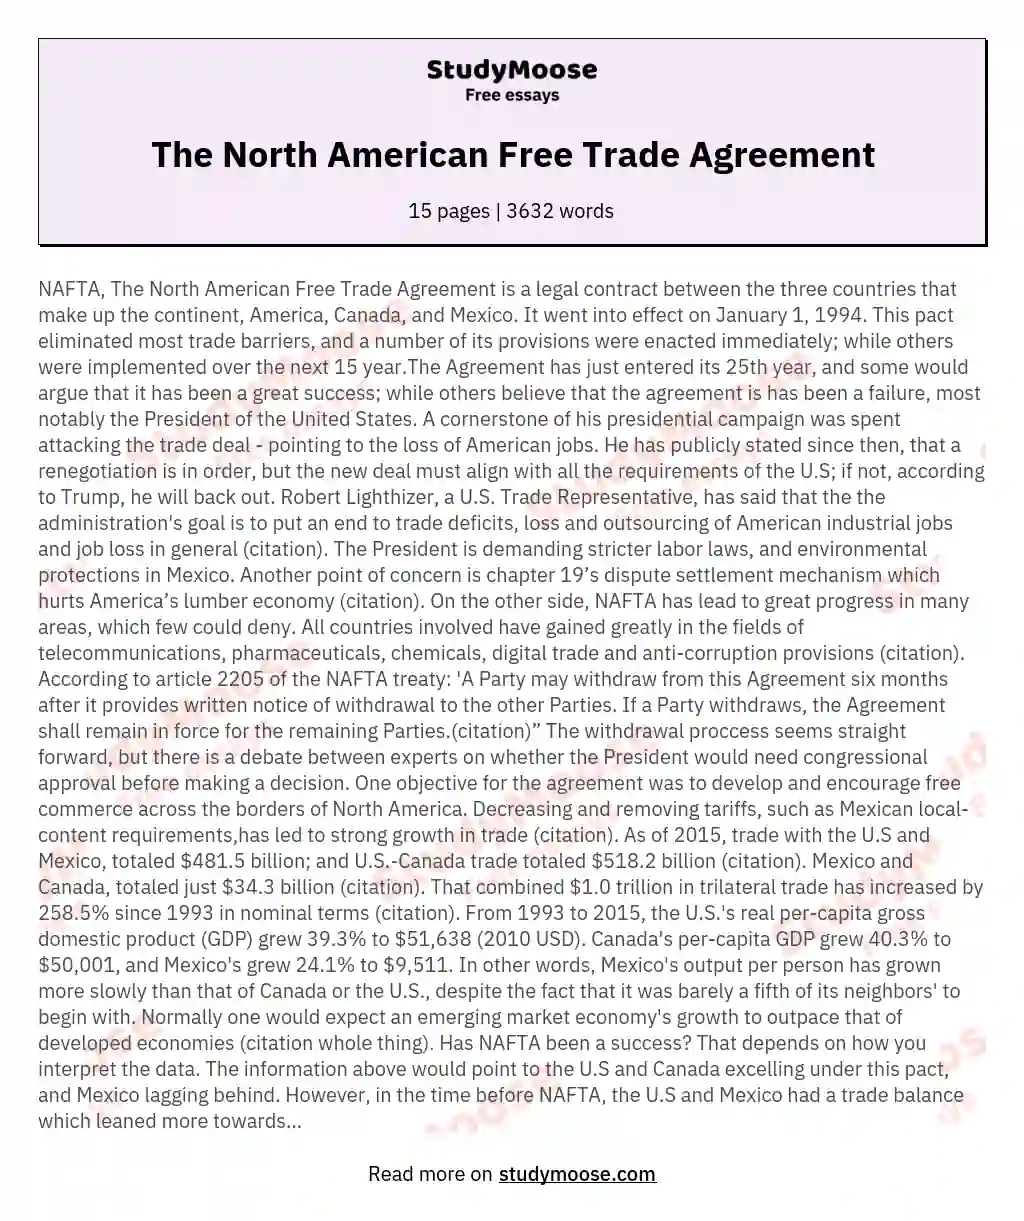 The North American Free Trade Agreement essay